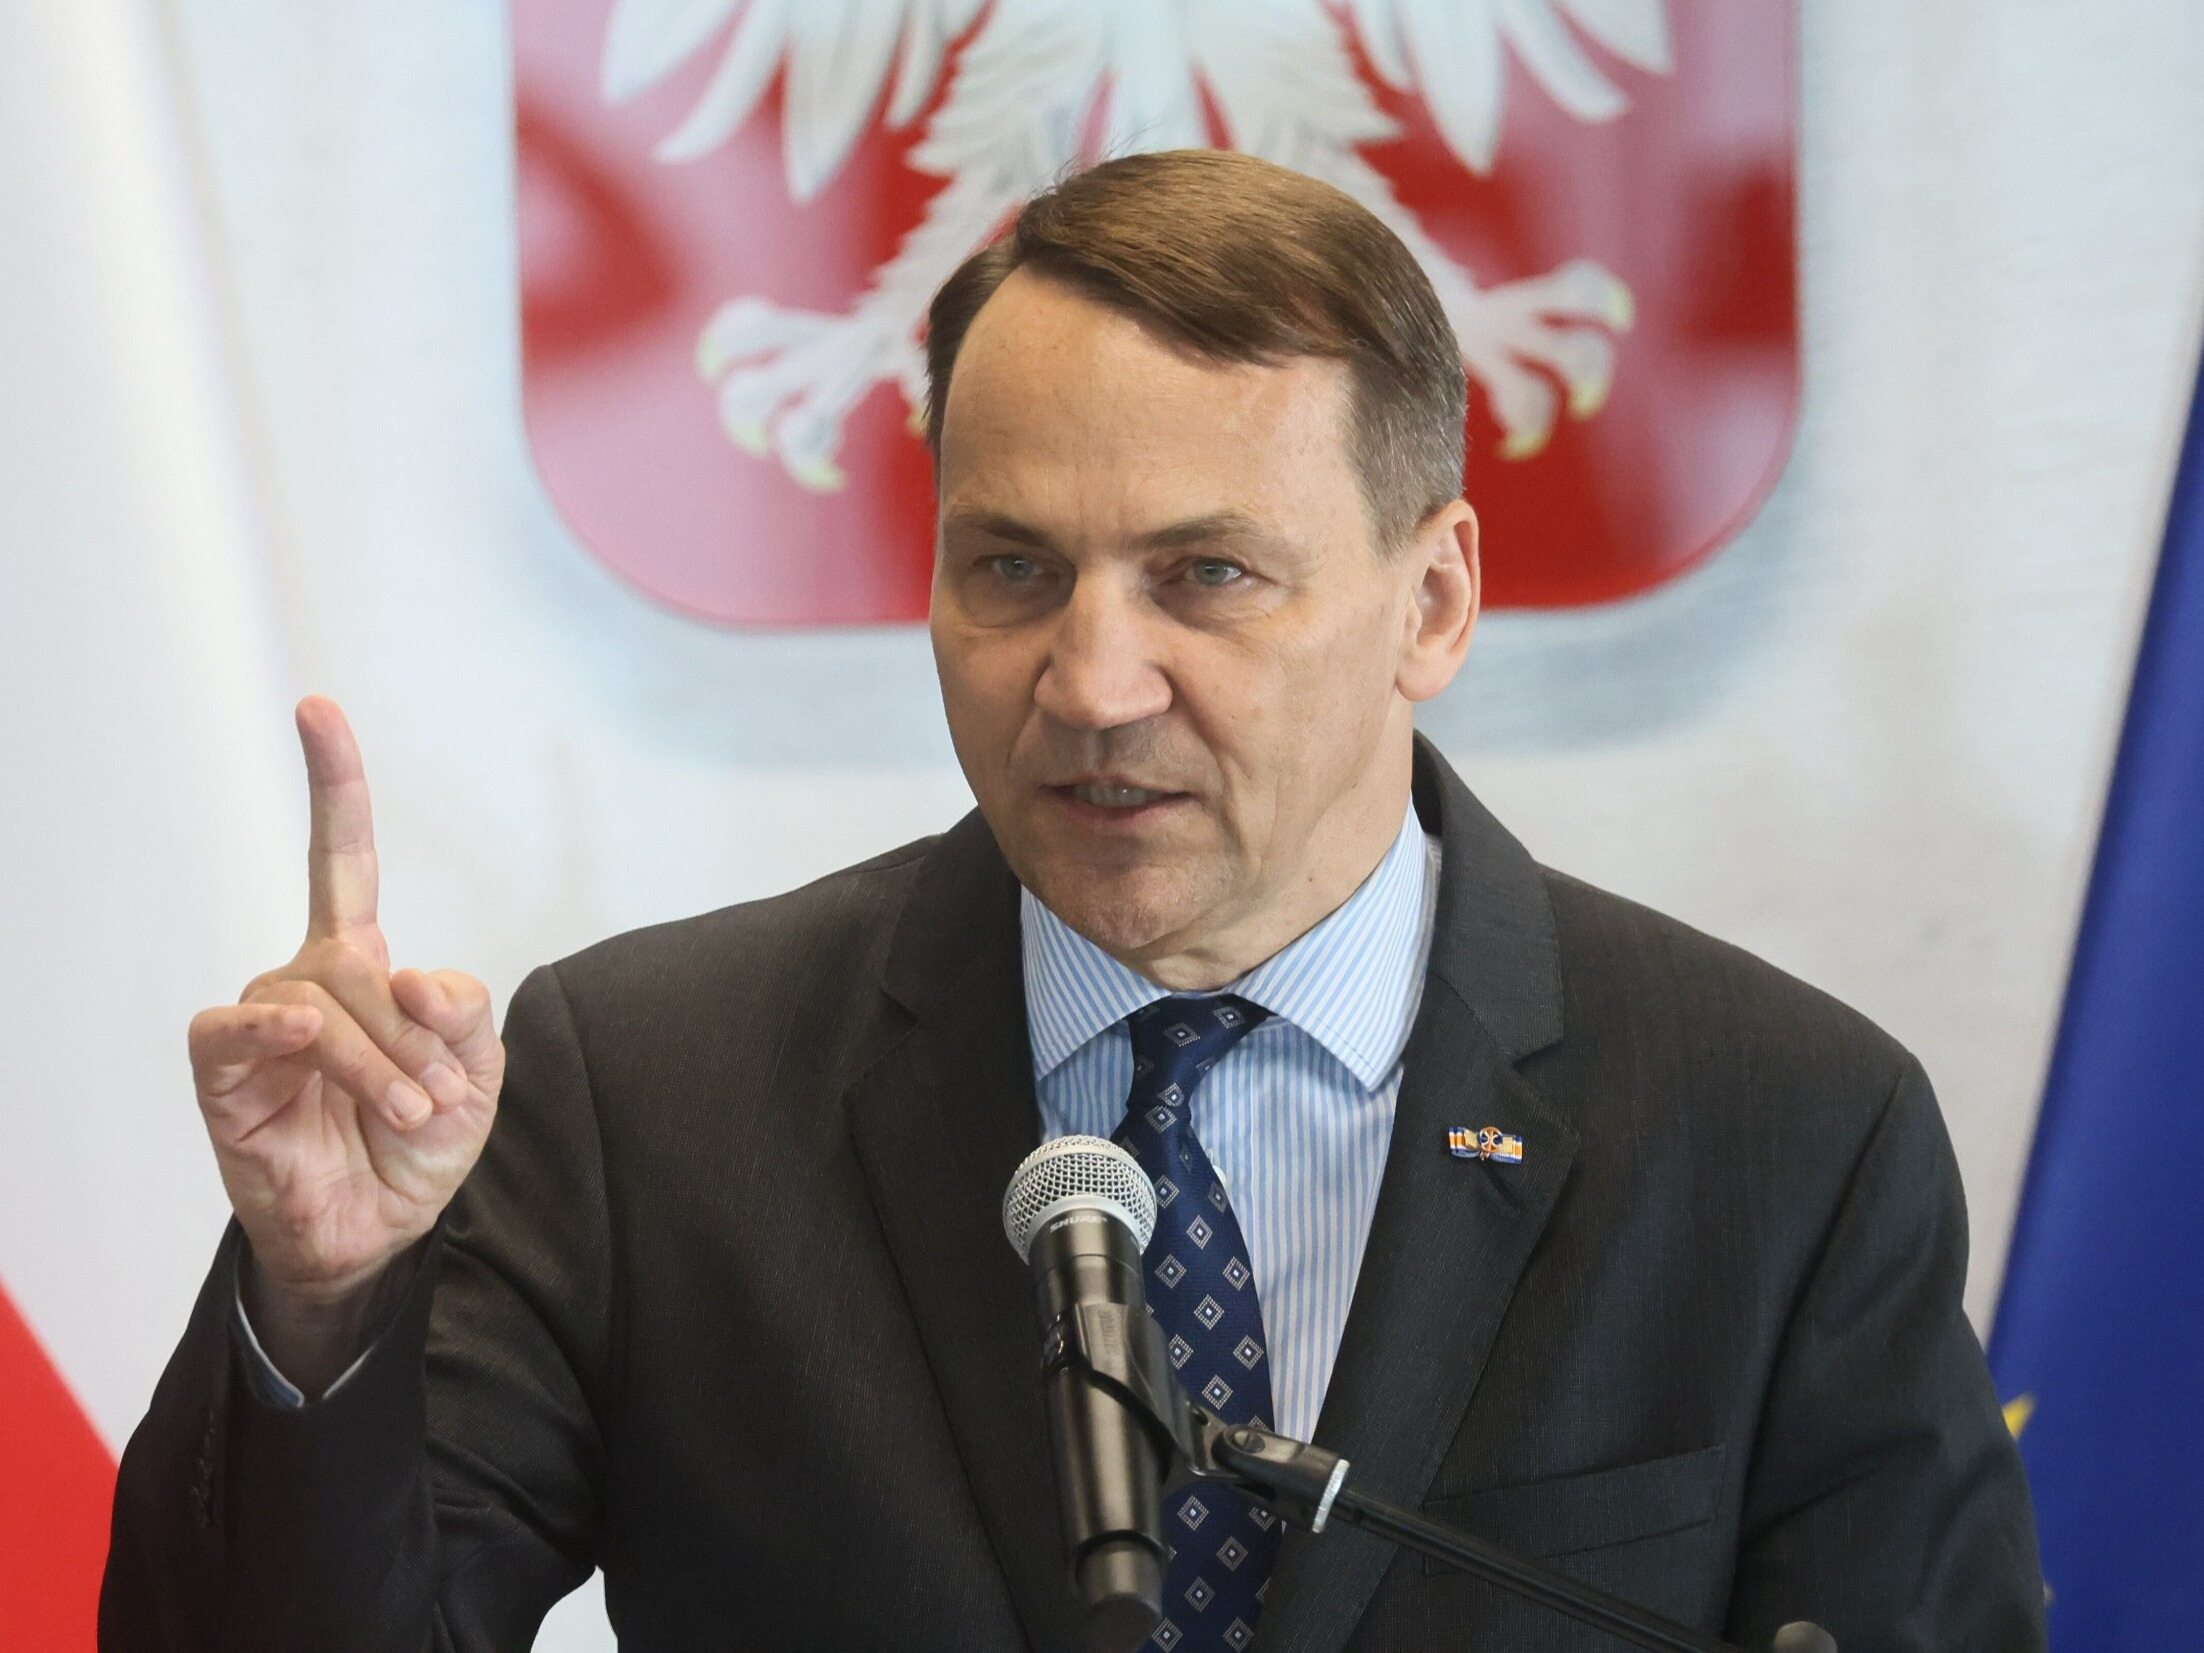 Sikorski makes a promise after the soldier's death.  "The Belarusian authorities will bear the consequences"